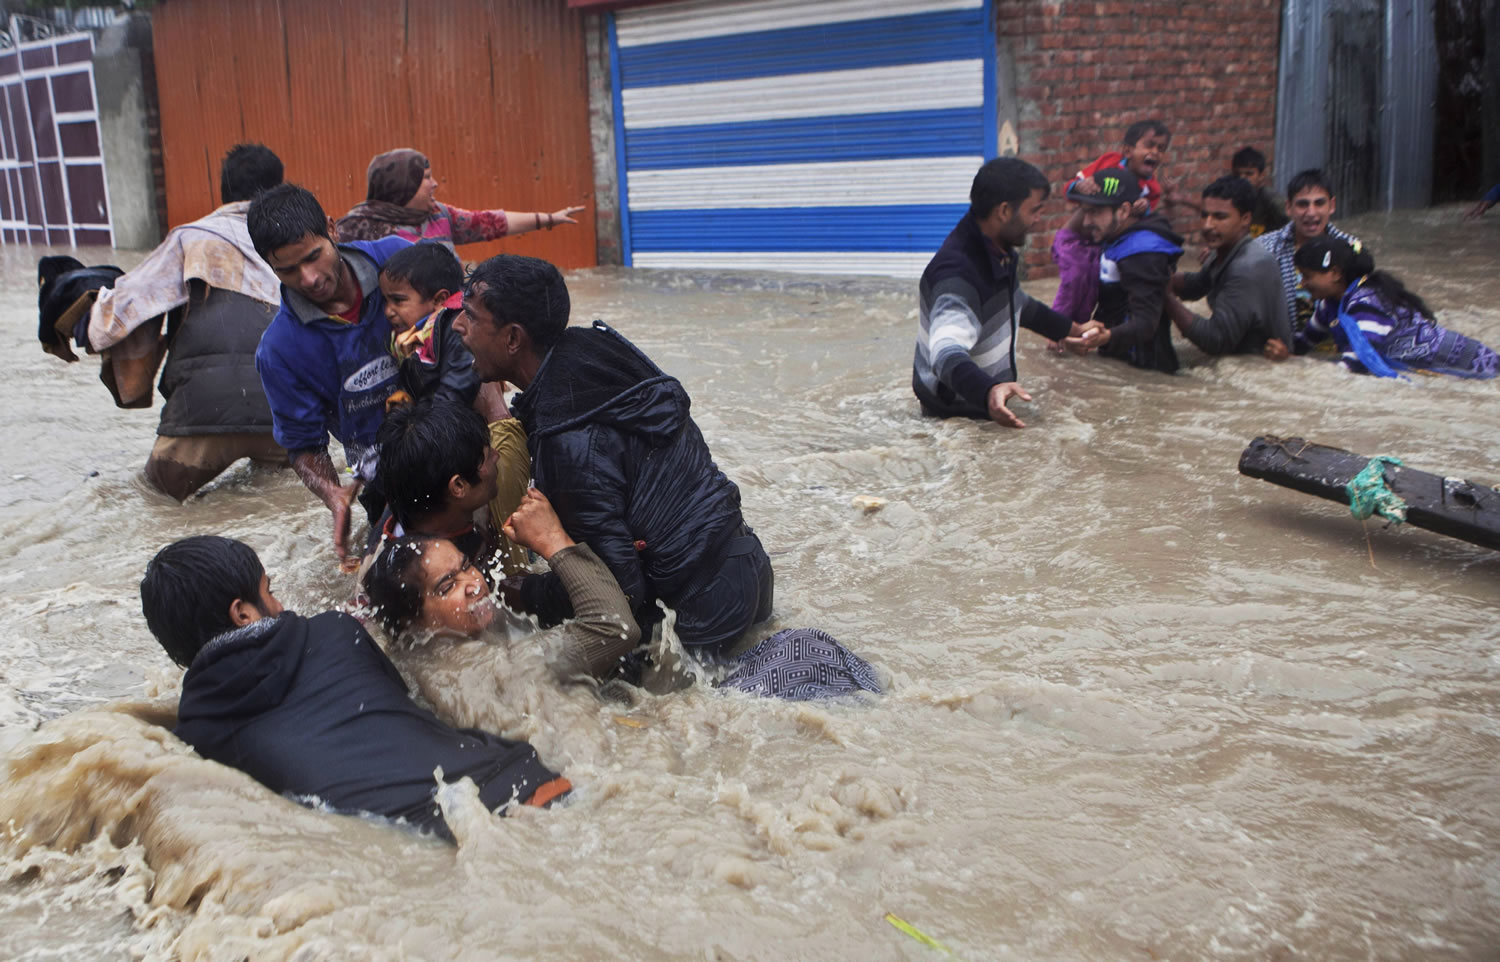 People struggle against strong currents in floodwaters while trying to move to safer ground Thursday in Srinagar, India.